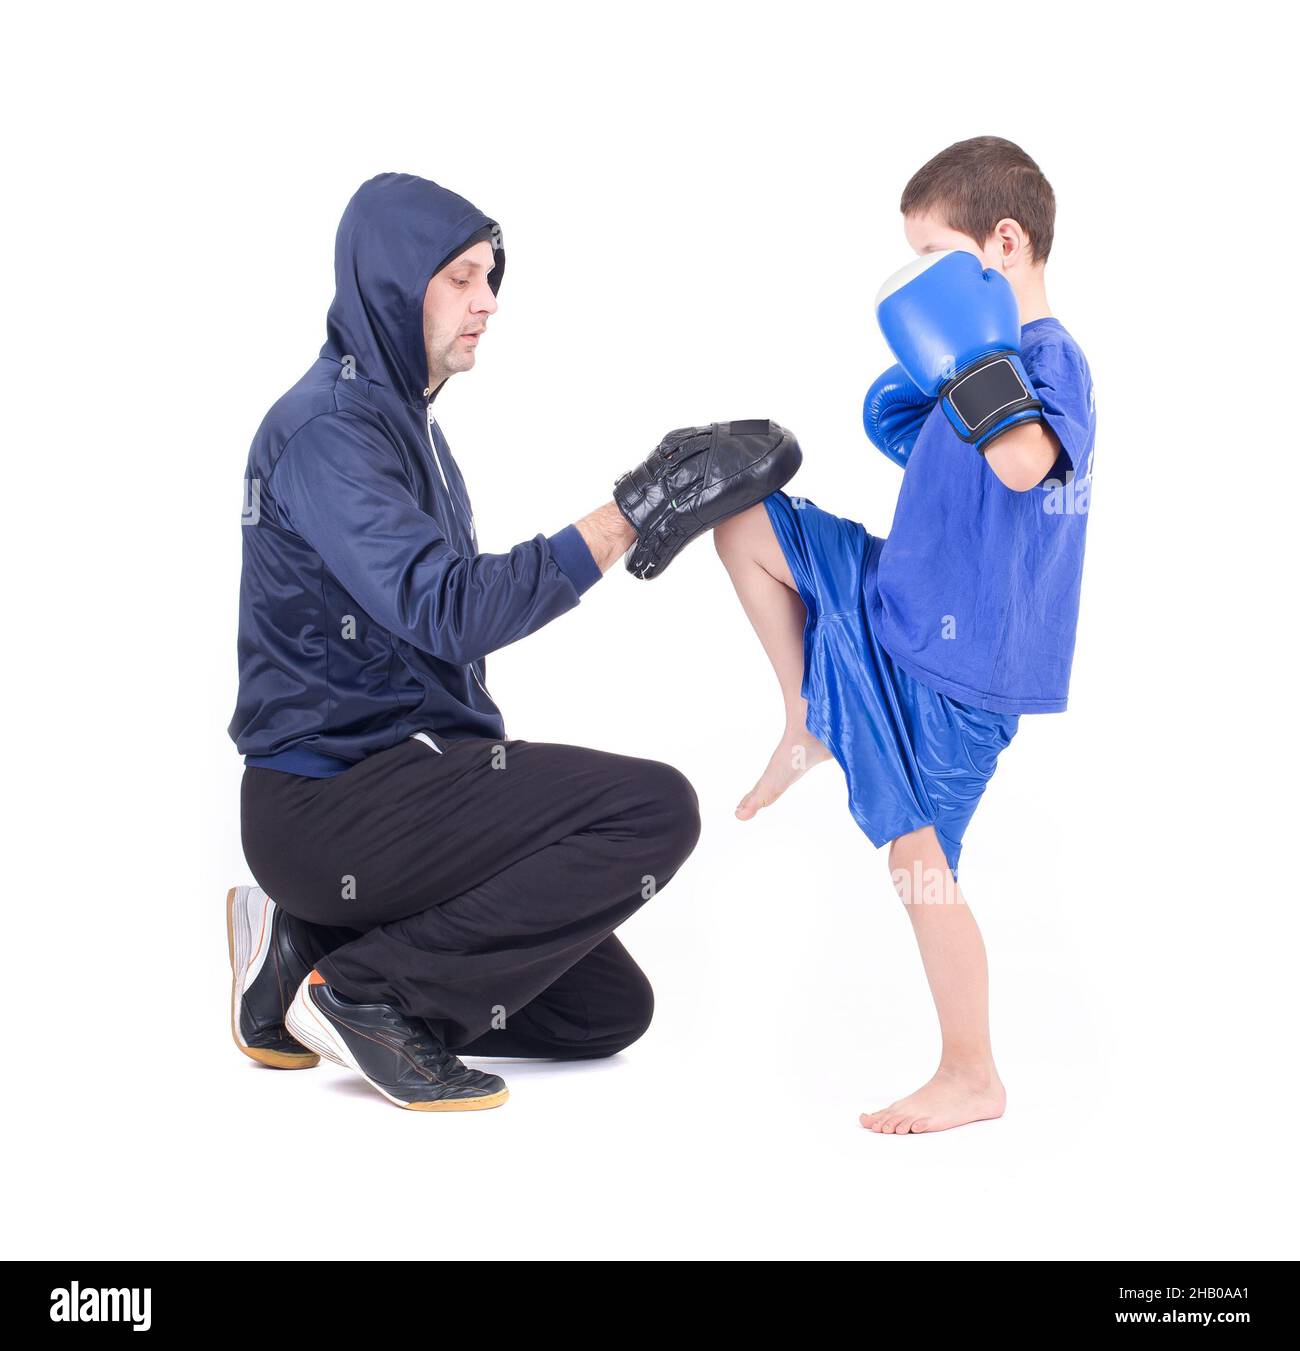 Kickboxing kids with instructor. Isolated on a white background. Studio shot Stock Photo